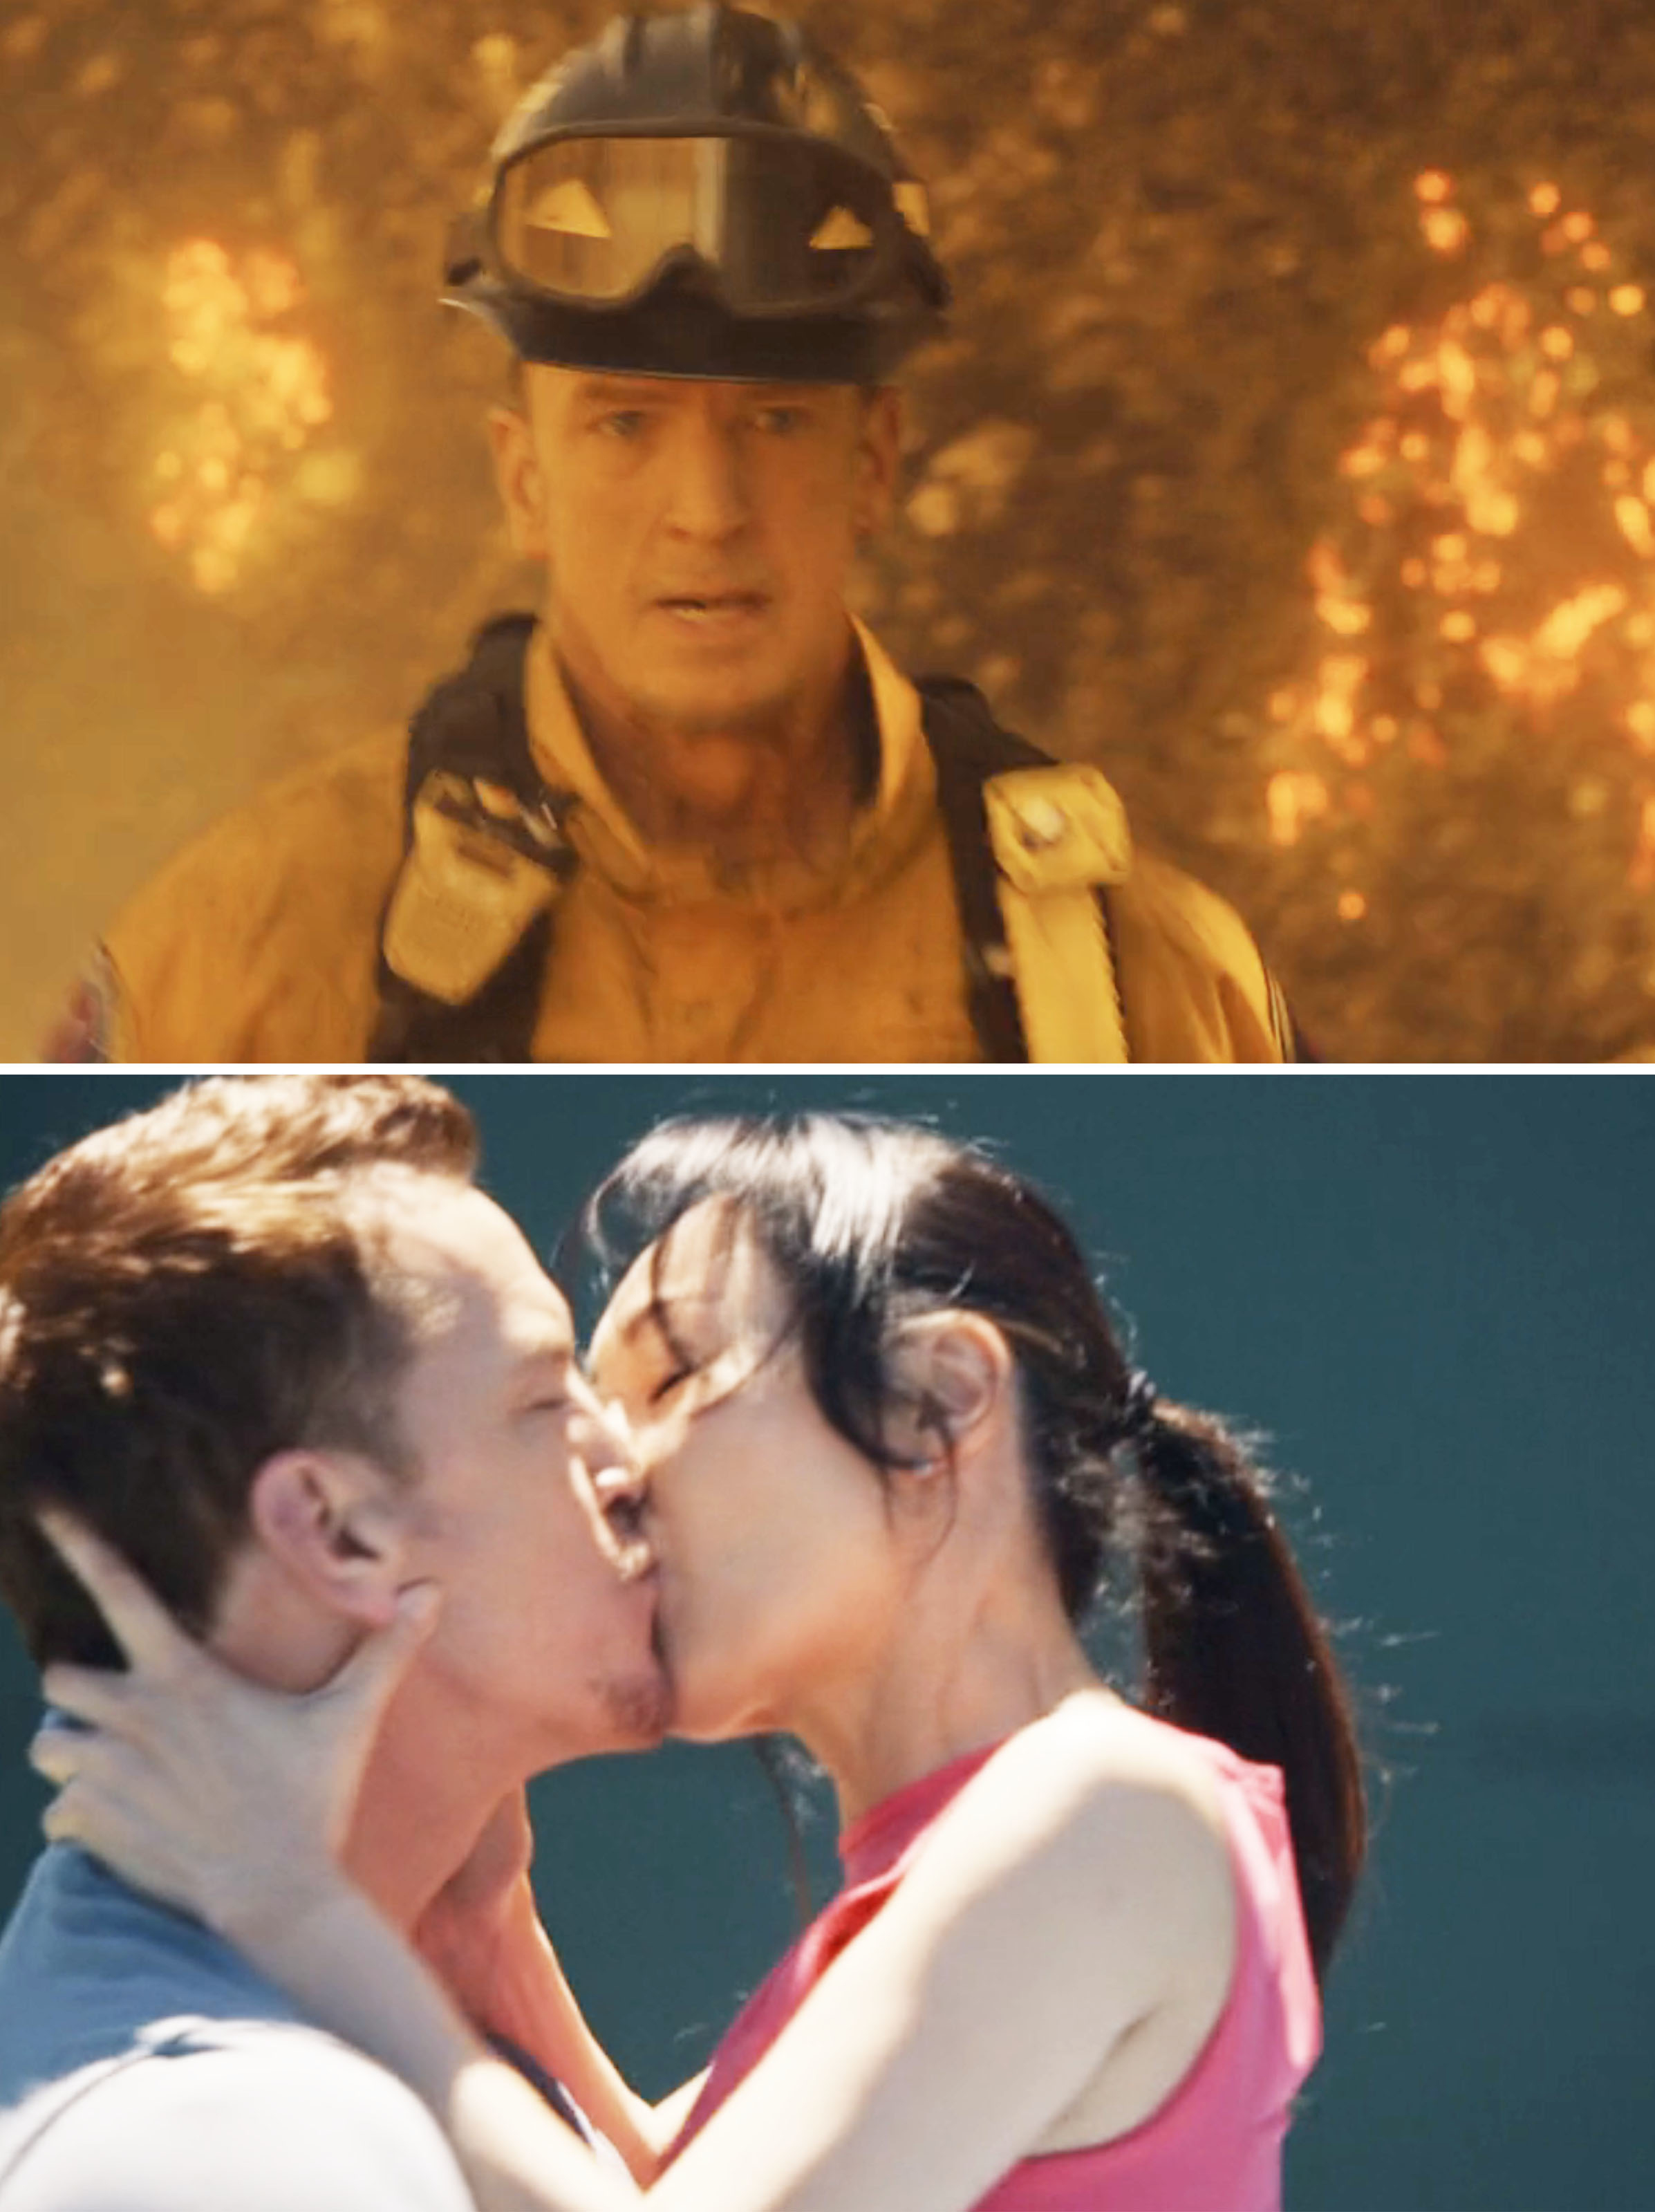 Two photos of Beckett, one with him fighting a wildfire vs. him and Jinny kissing